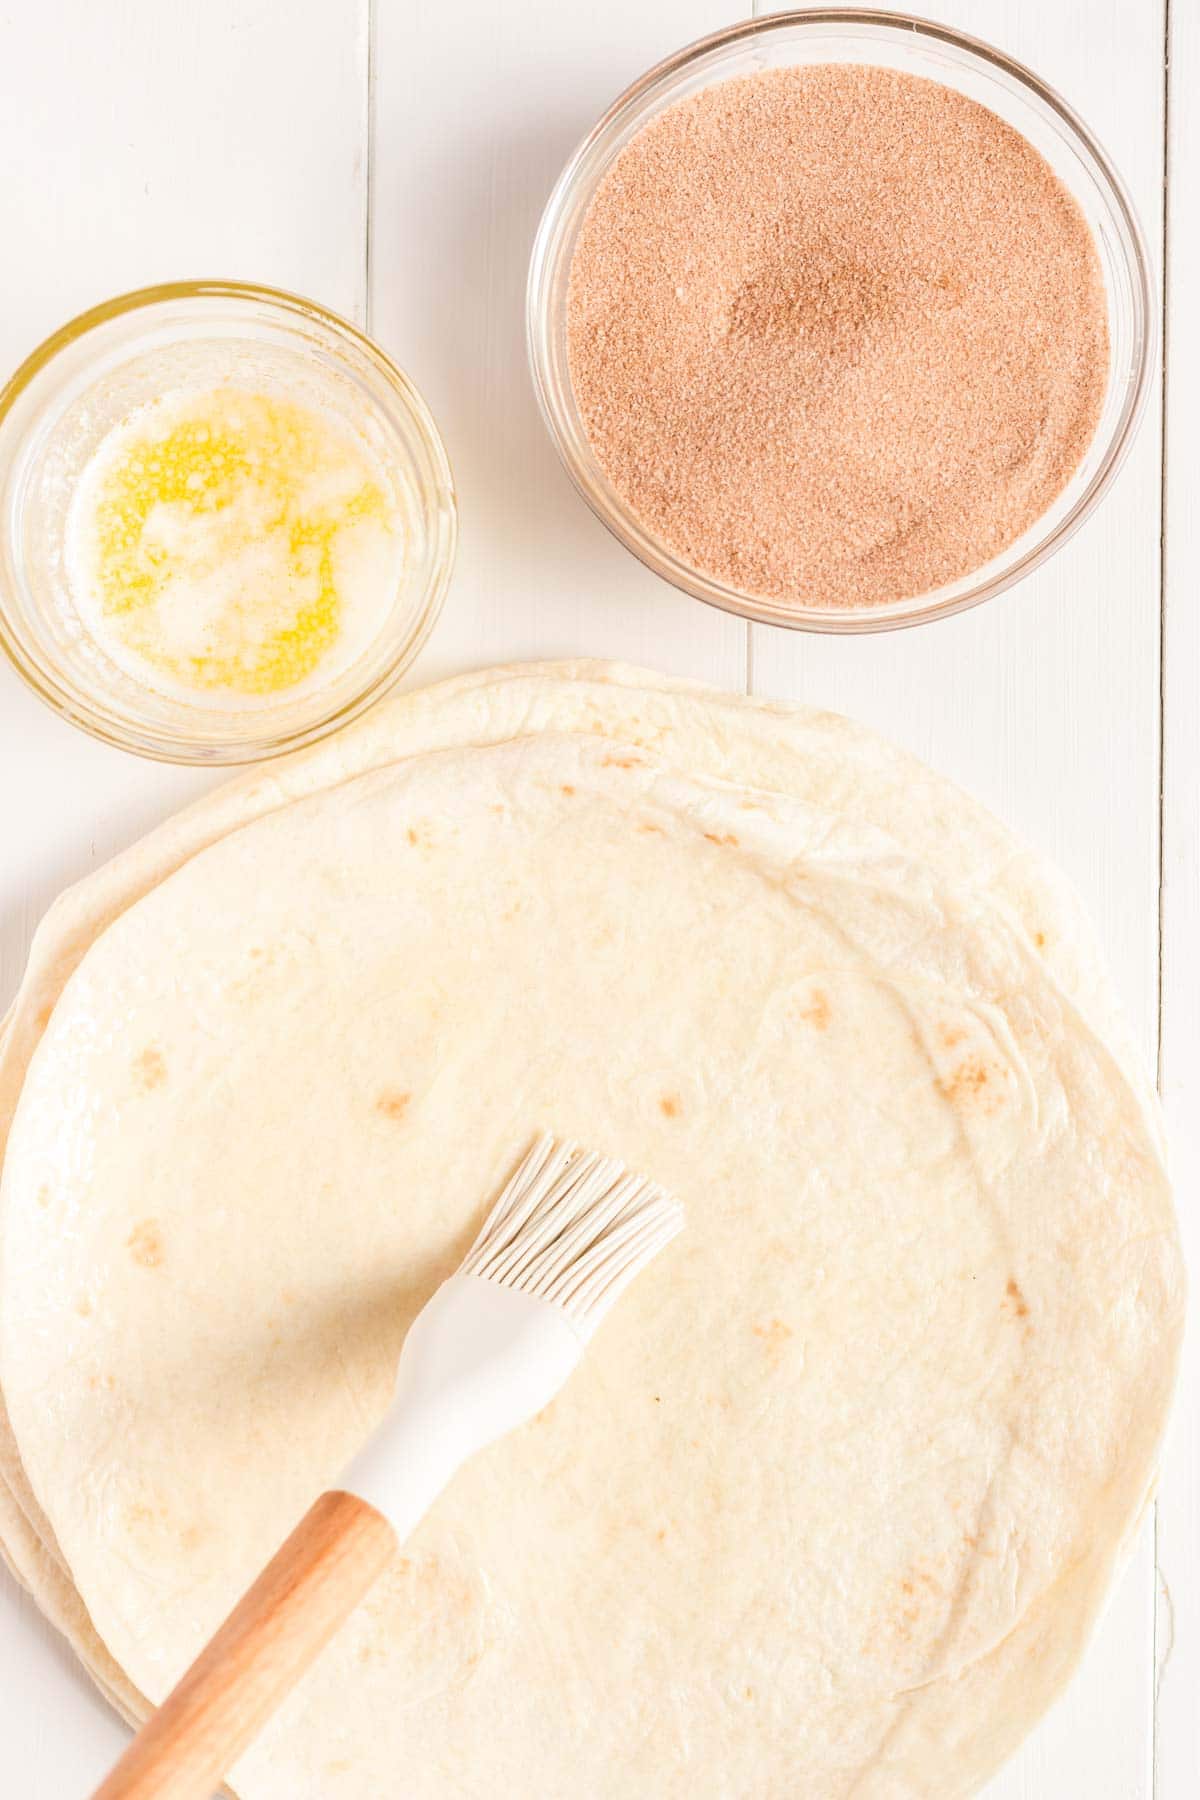 Silicone brush with a stack of tortillas and a bowl of melted butter and cinnamon sugar